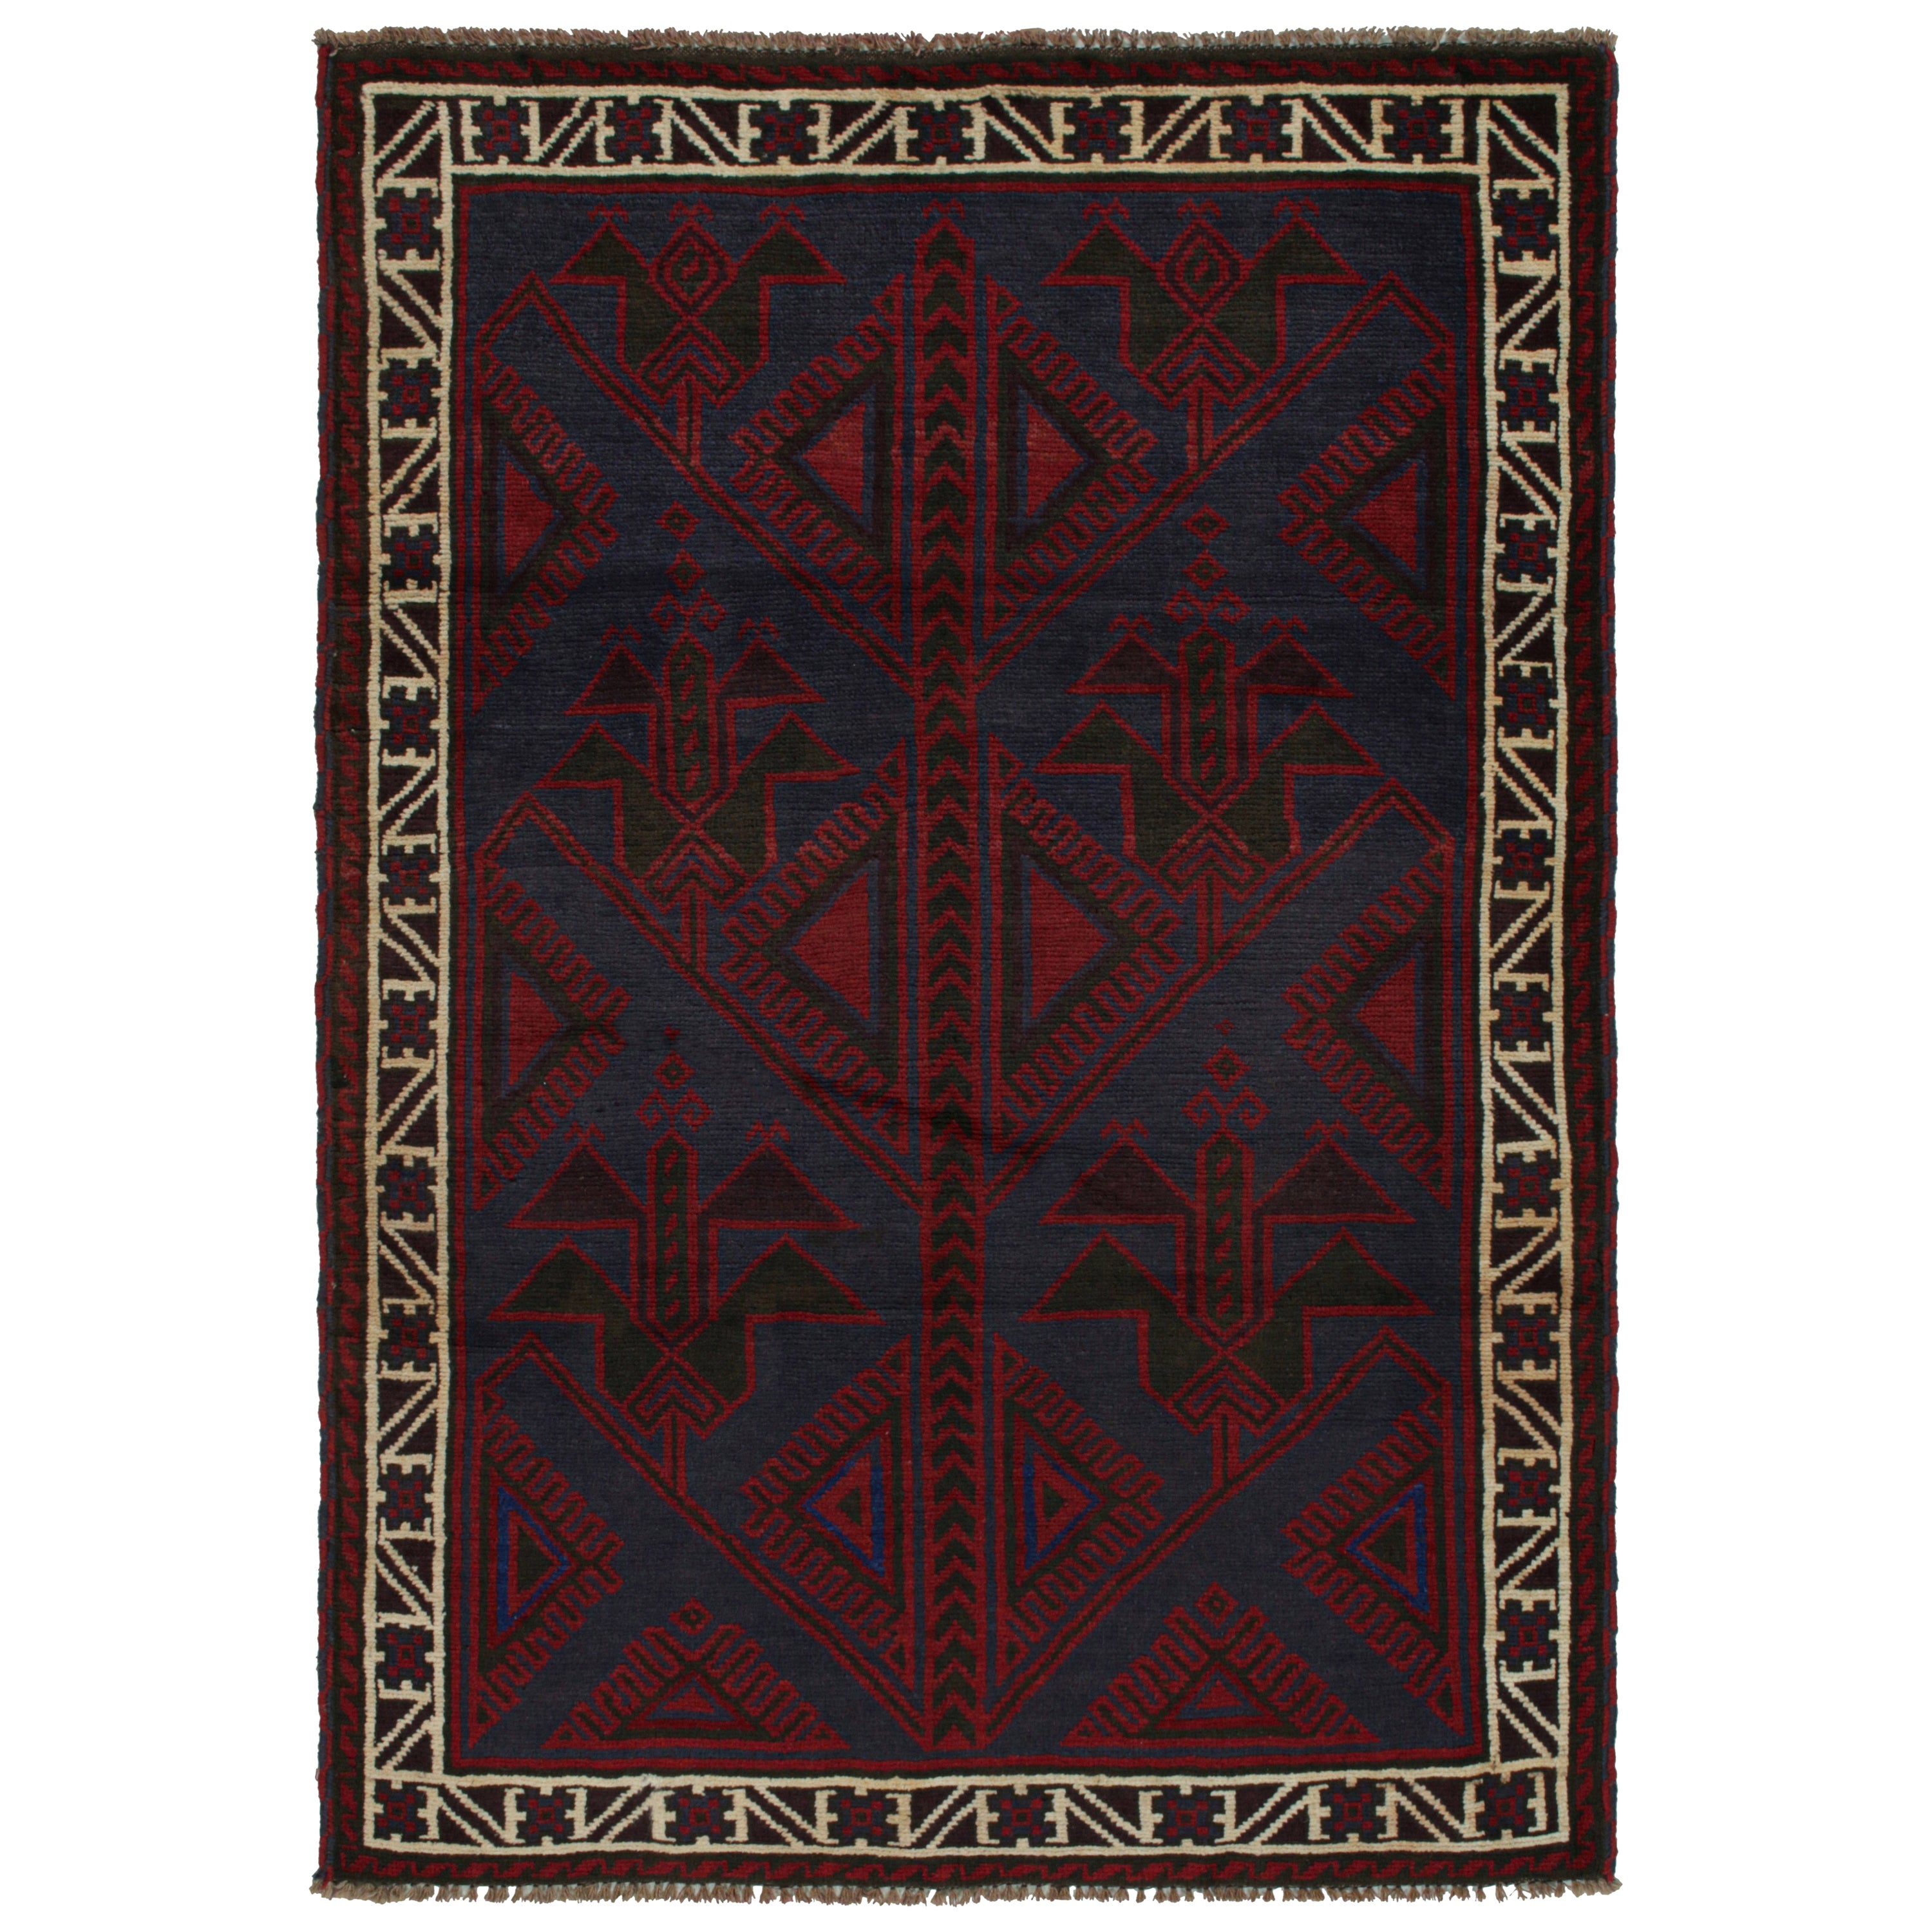 Vintage Baluch Tribal Rug in Red & Blue Geometric Patterns, from Rug & Kilim For Sale